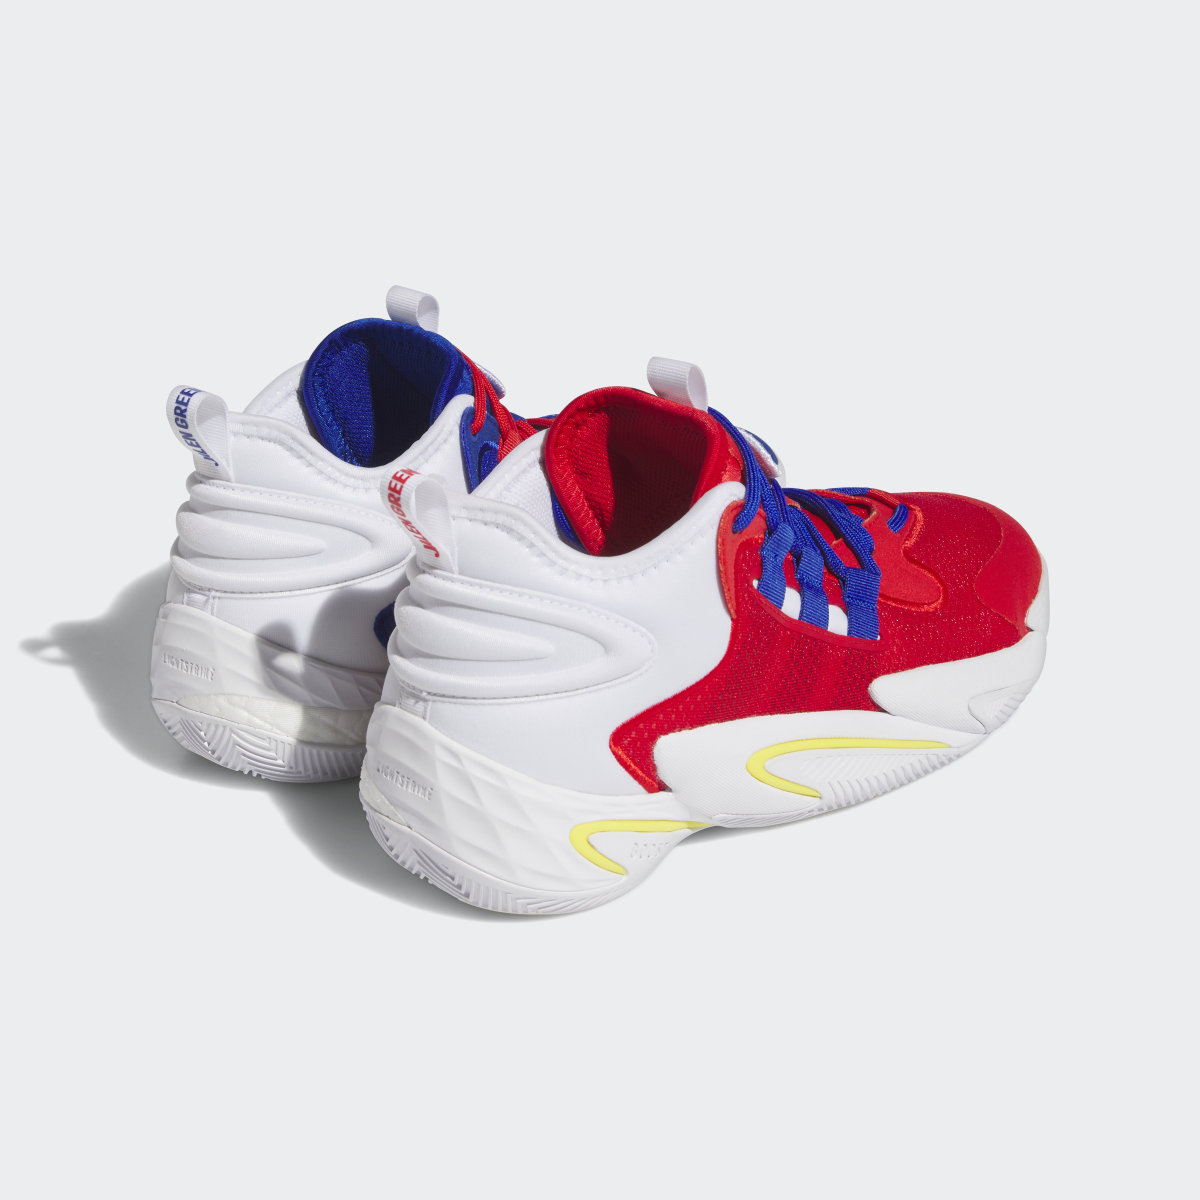 Adidas BYW Select Shoes. 6